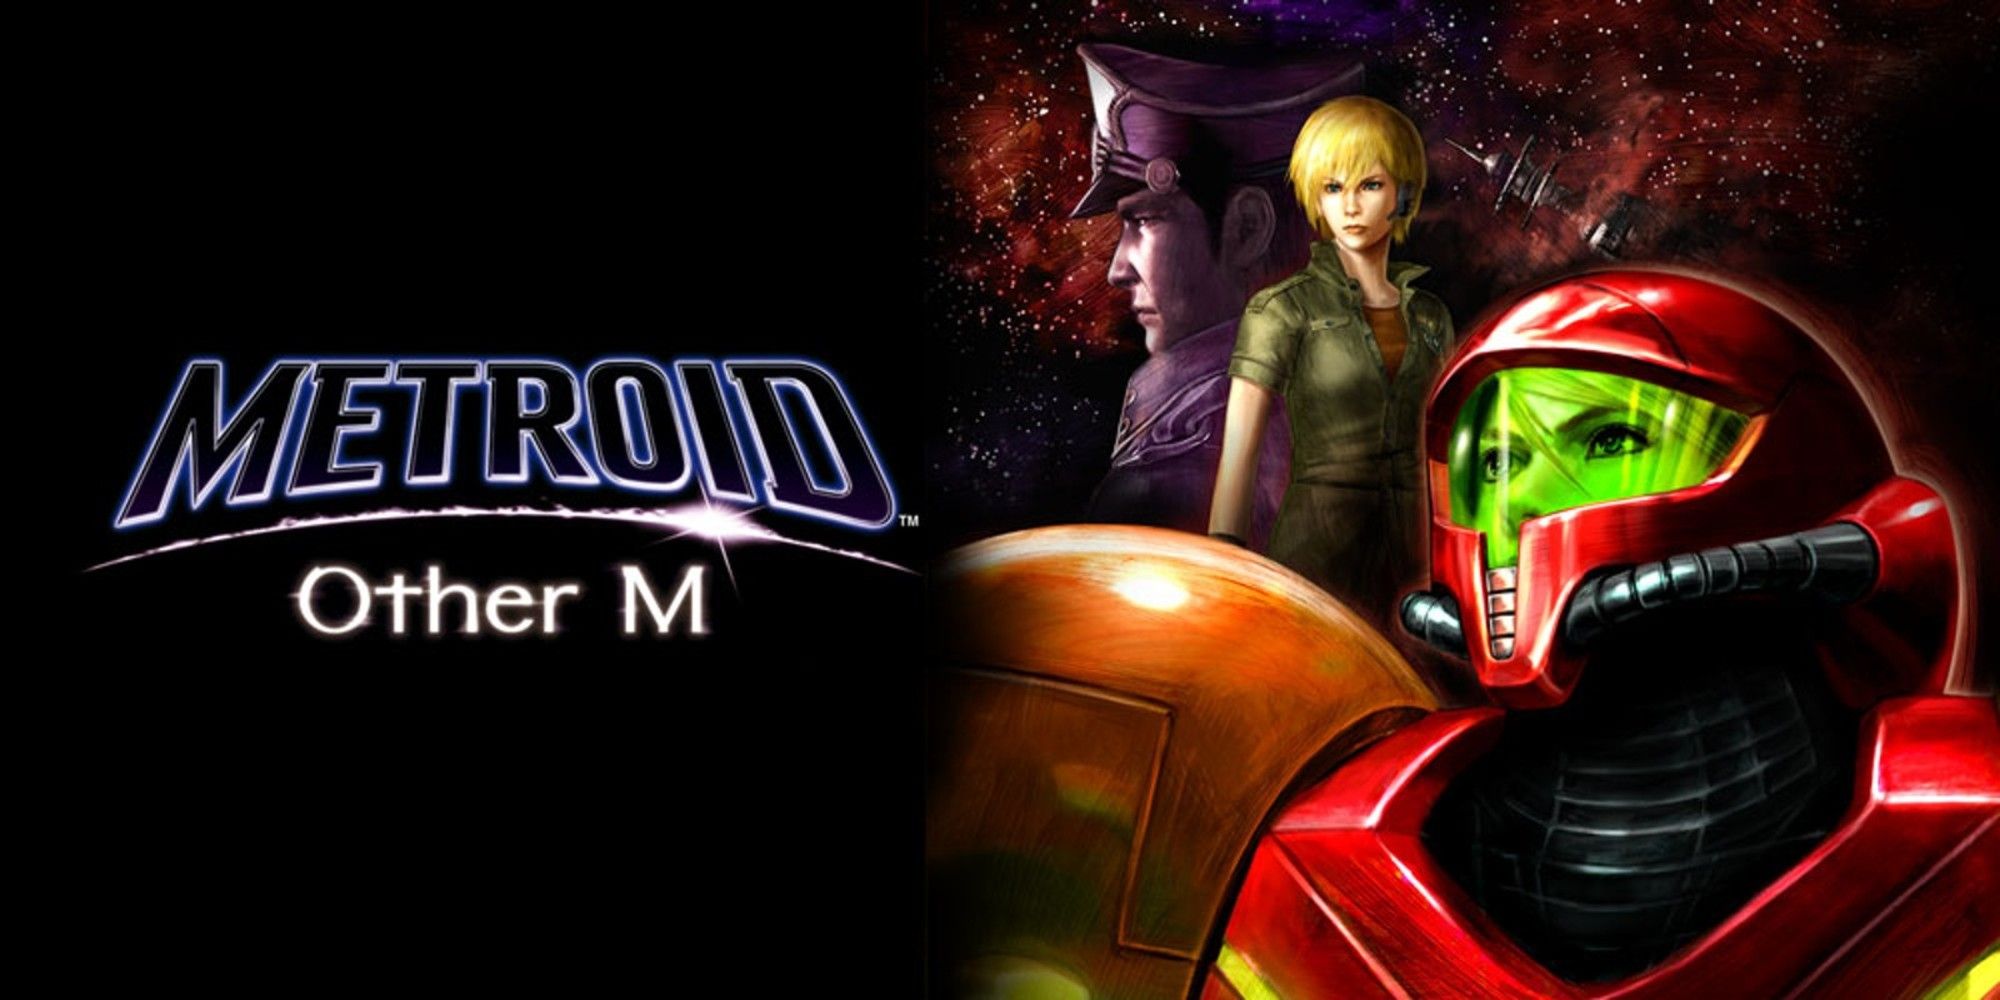 Metroid Other M promotional image